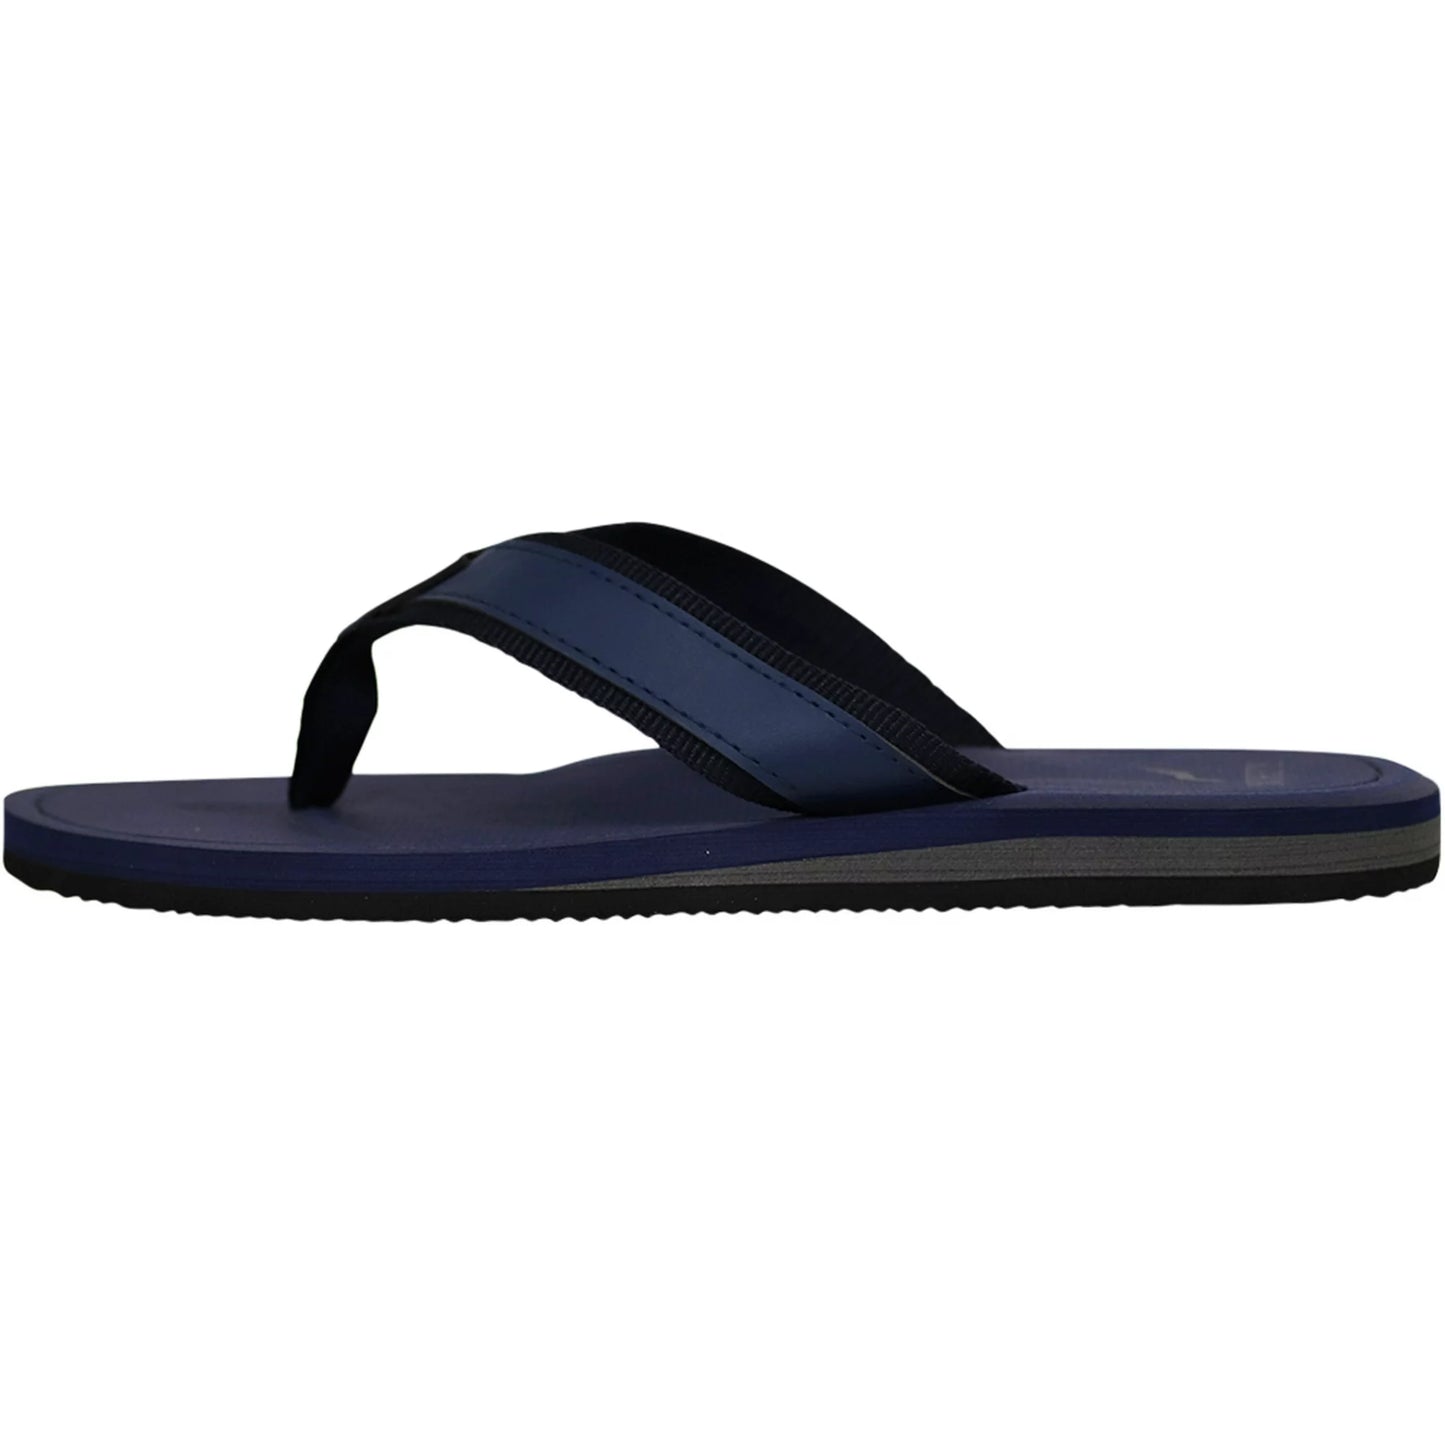 NORTY Men's Arch Support Sandal, (11175) Navy